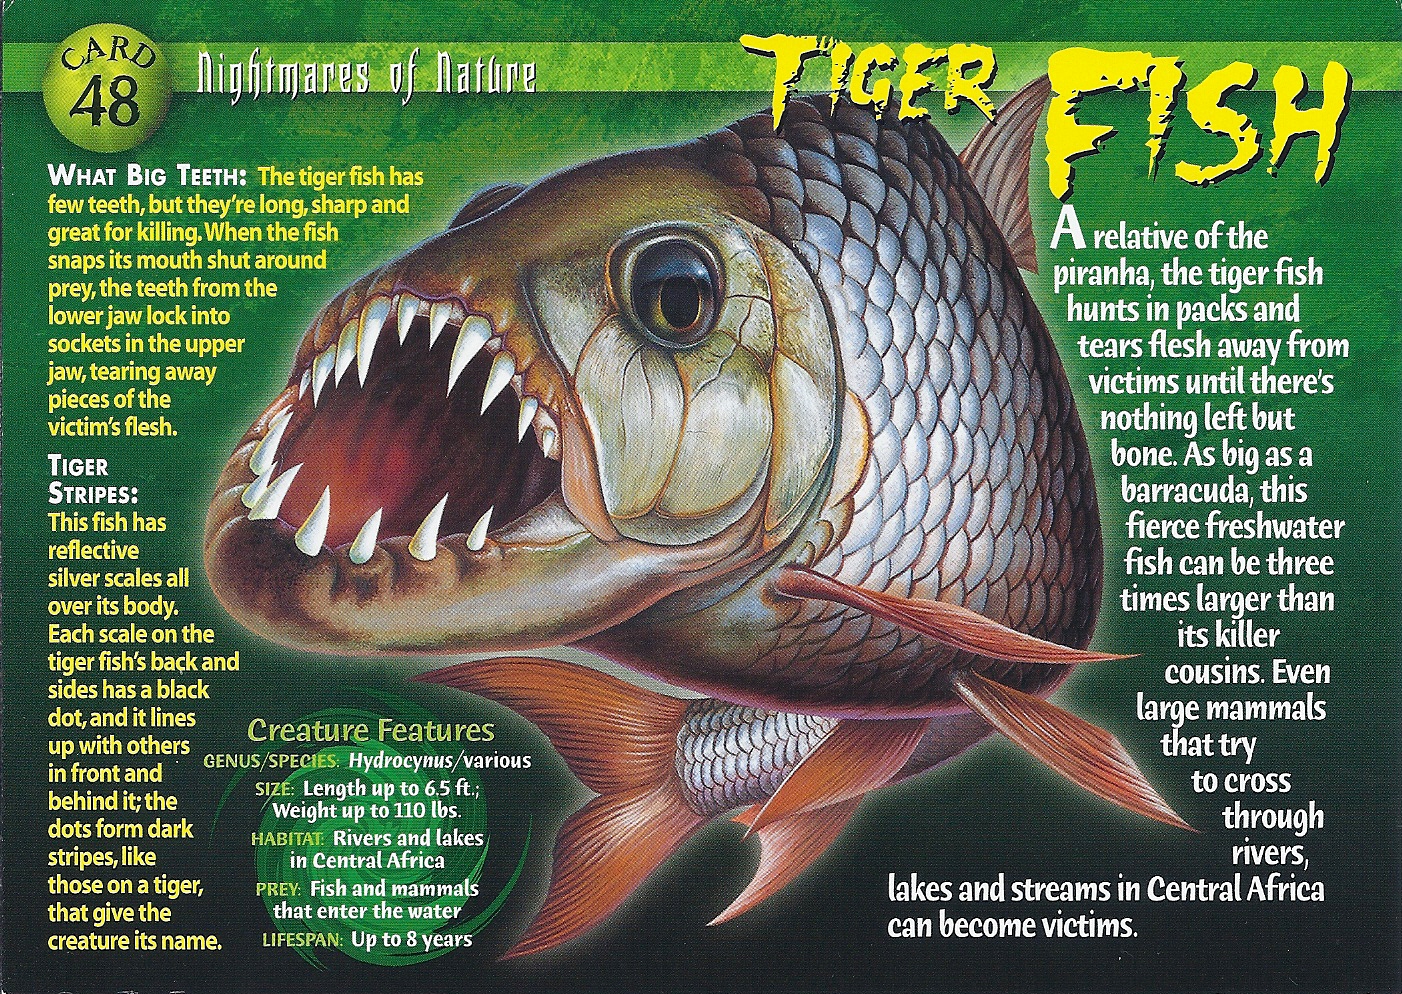 https://static.wikia.nocookie.net/wierdnwildcreatures/images/e/e5/Tiger_Fish_front.jpg/revision/latest?cb=20130830022206